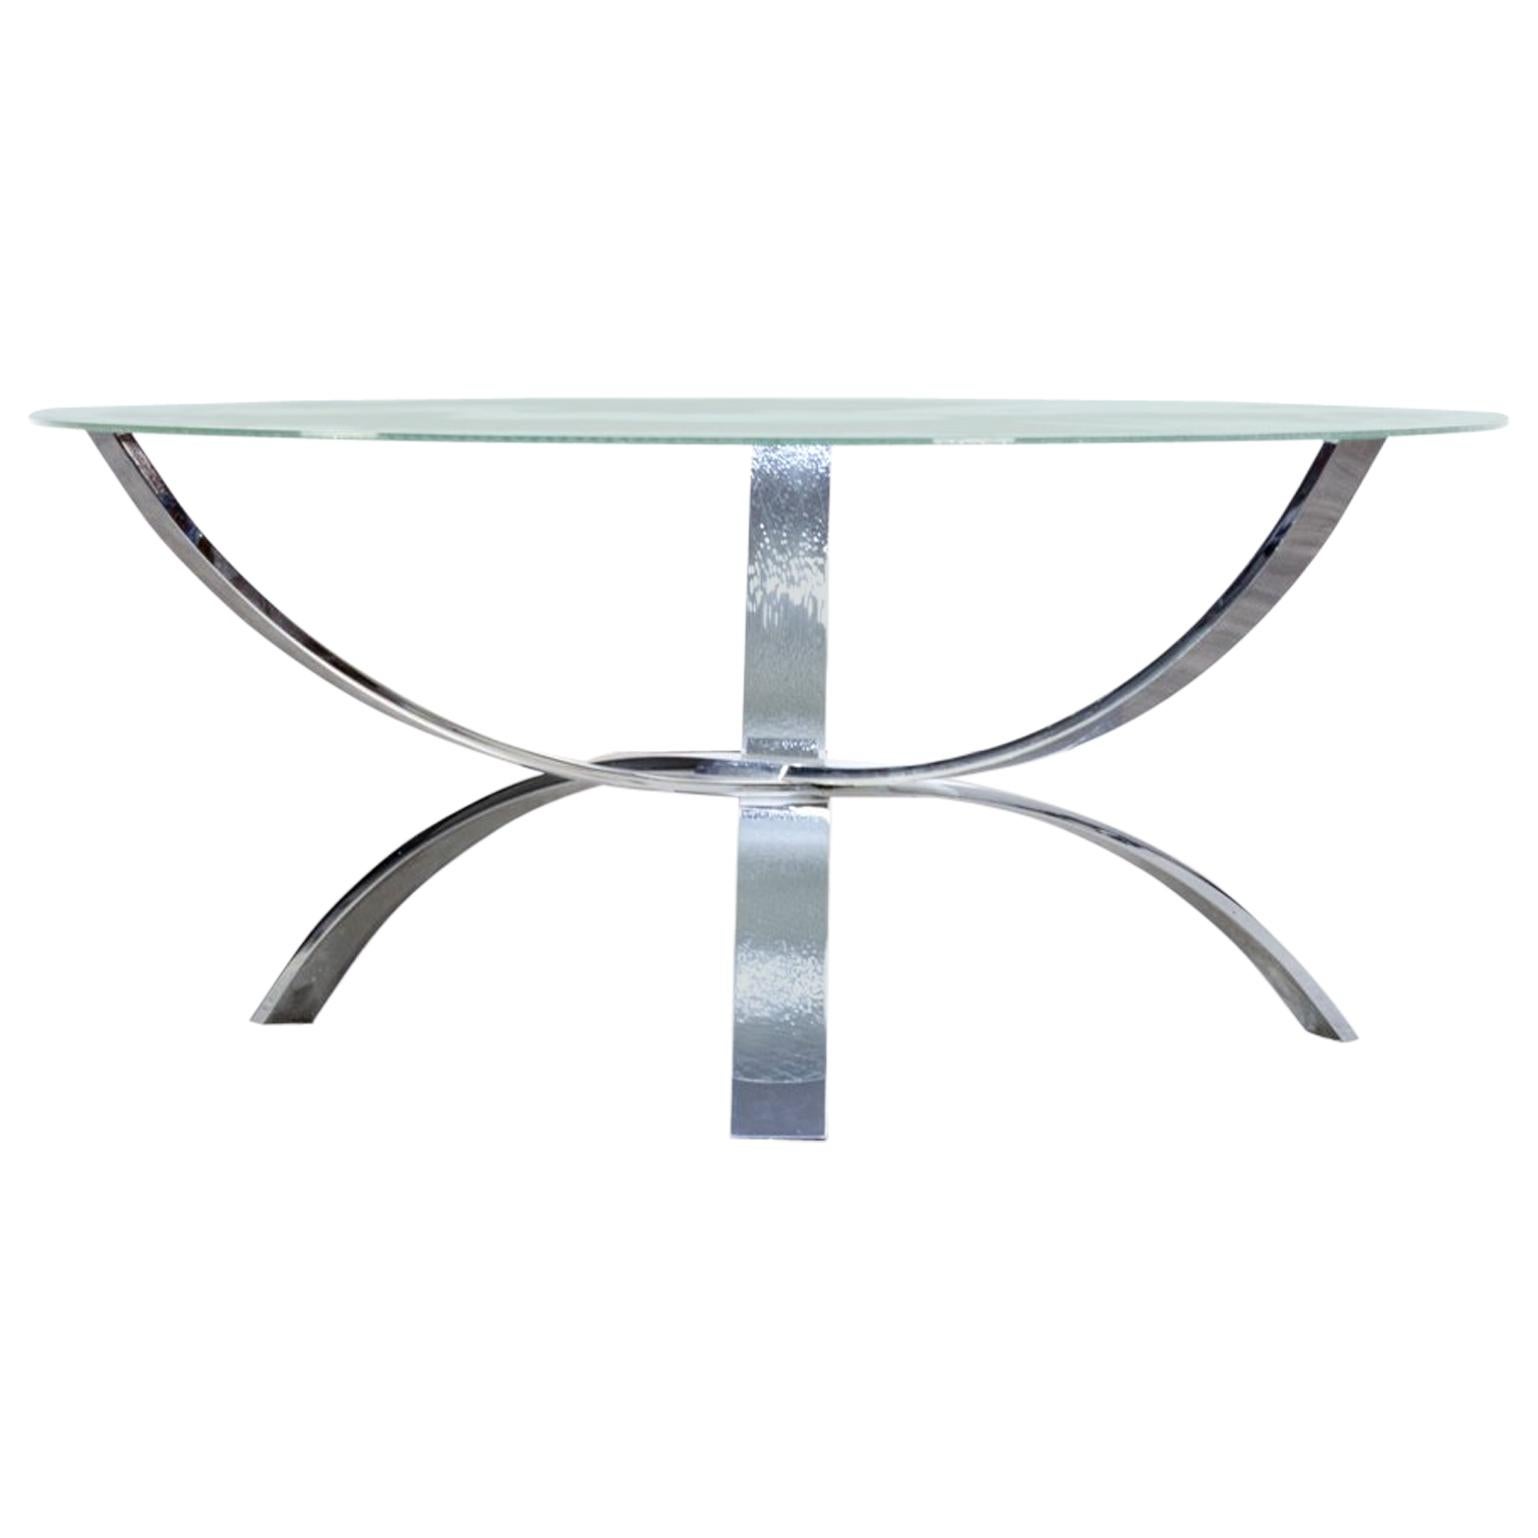 Beautiful Designed Chromed Metal Framed Coffee Table, Glass Worktop For Sale